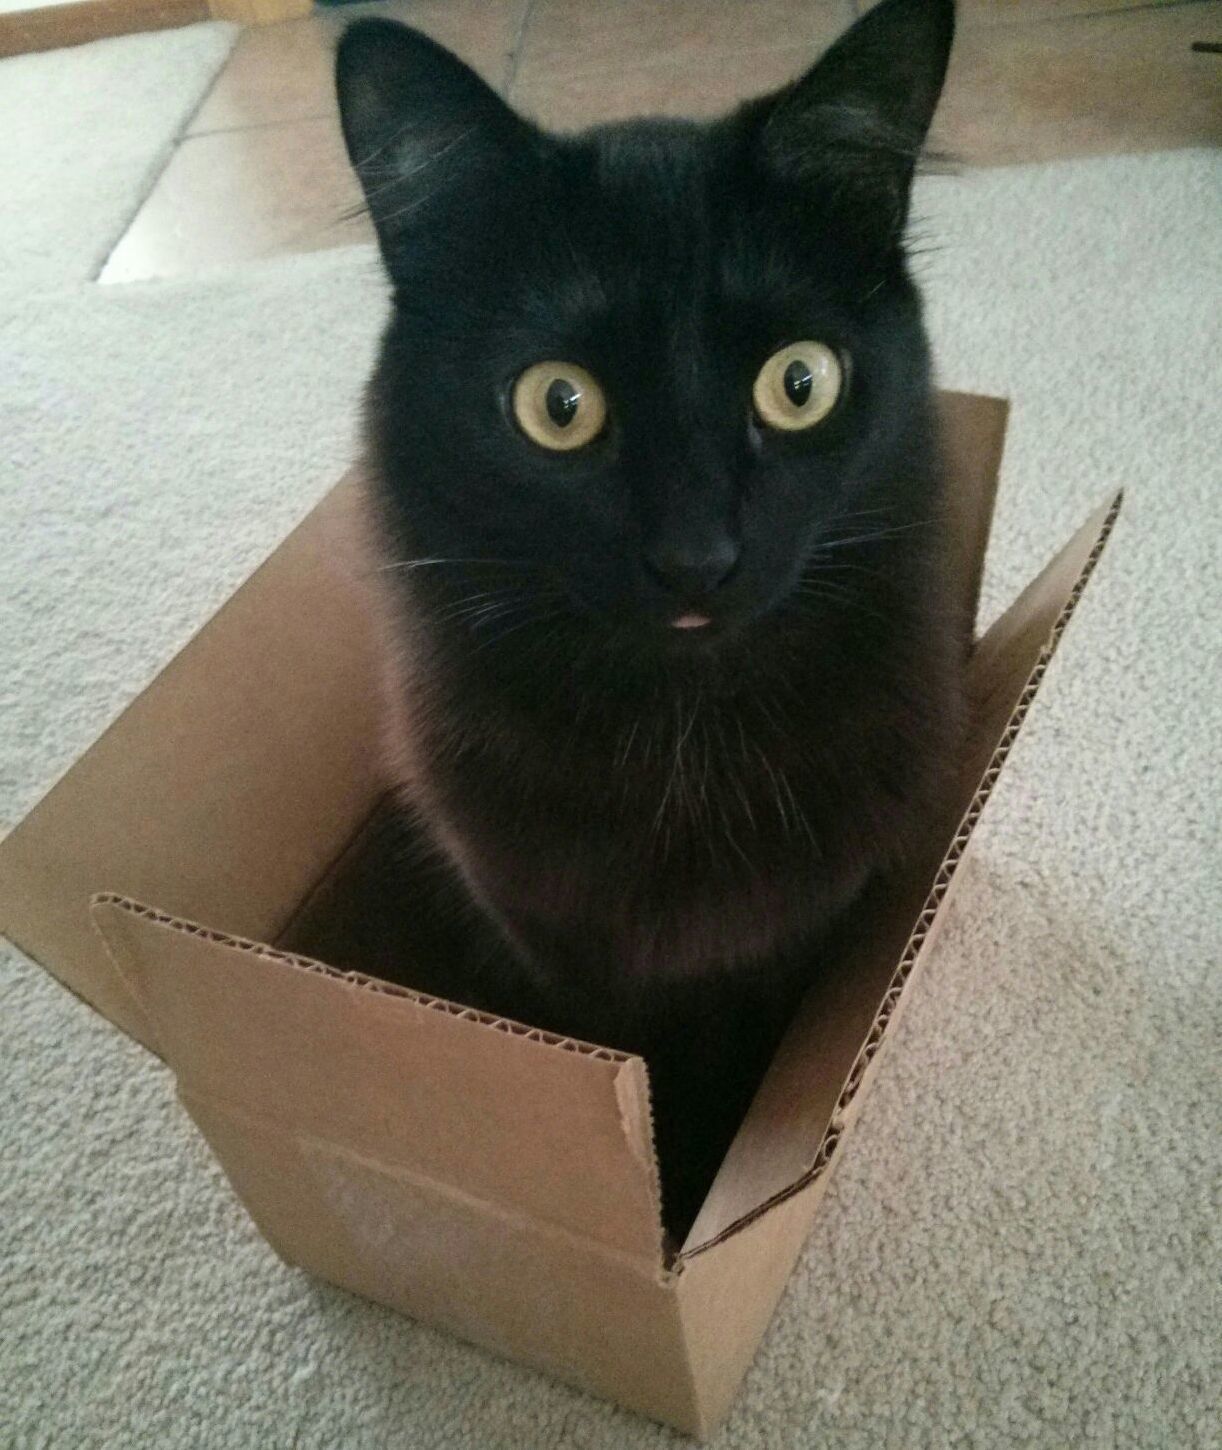 Meet chloe my rescue. her hobbies include making her eyes huge sticking out her tongue and box sitting.